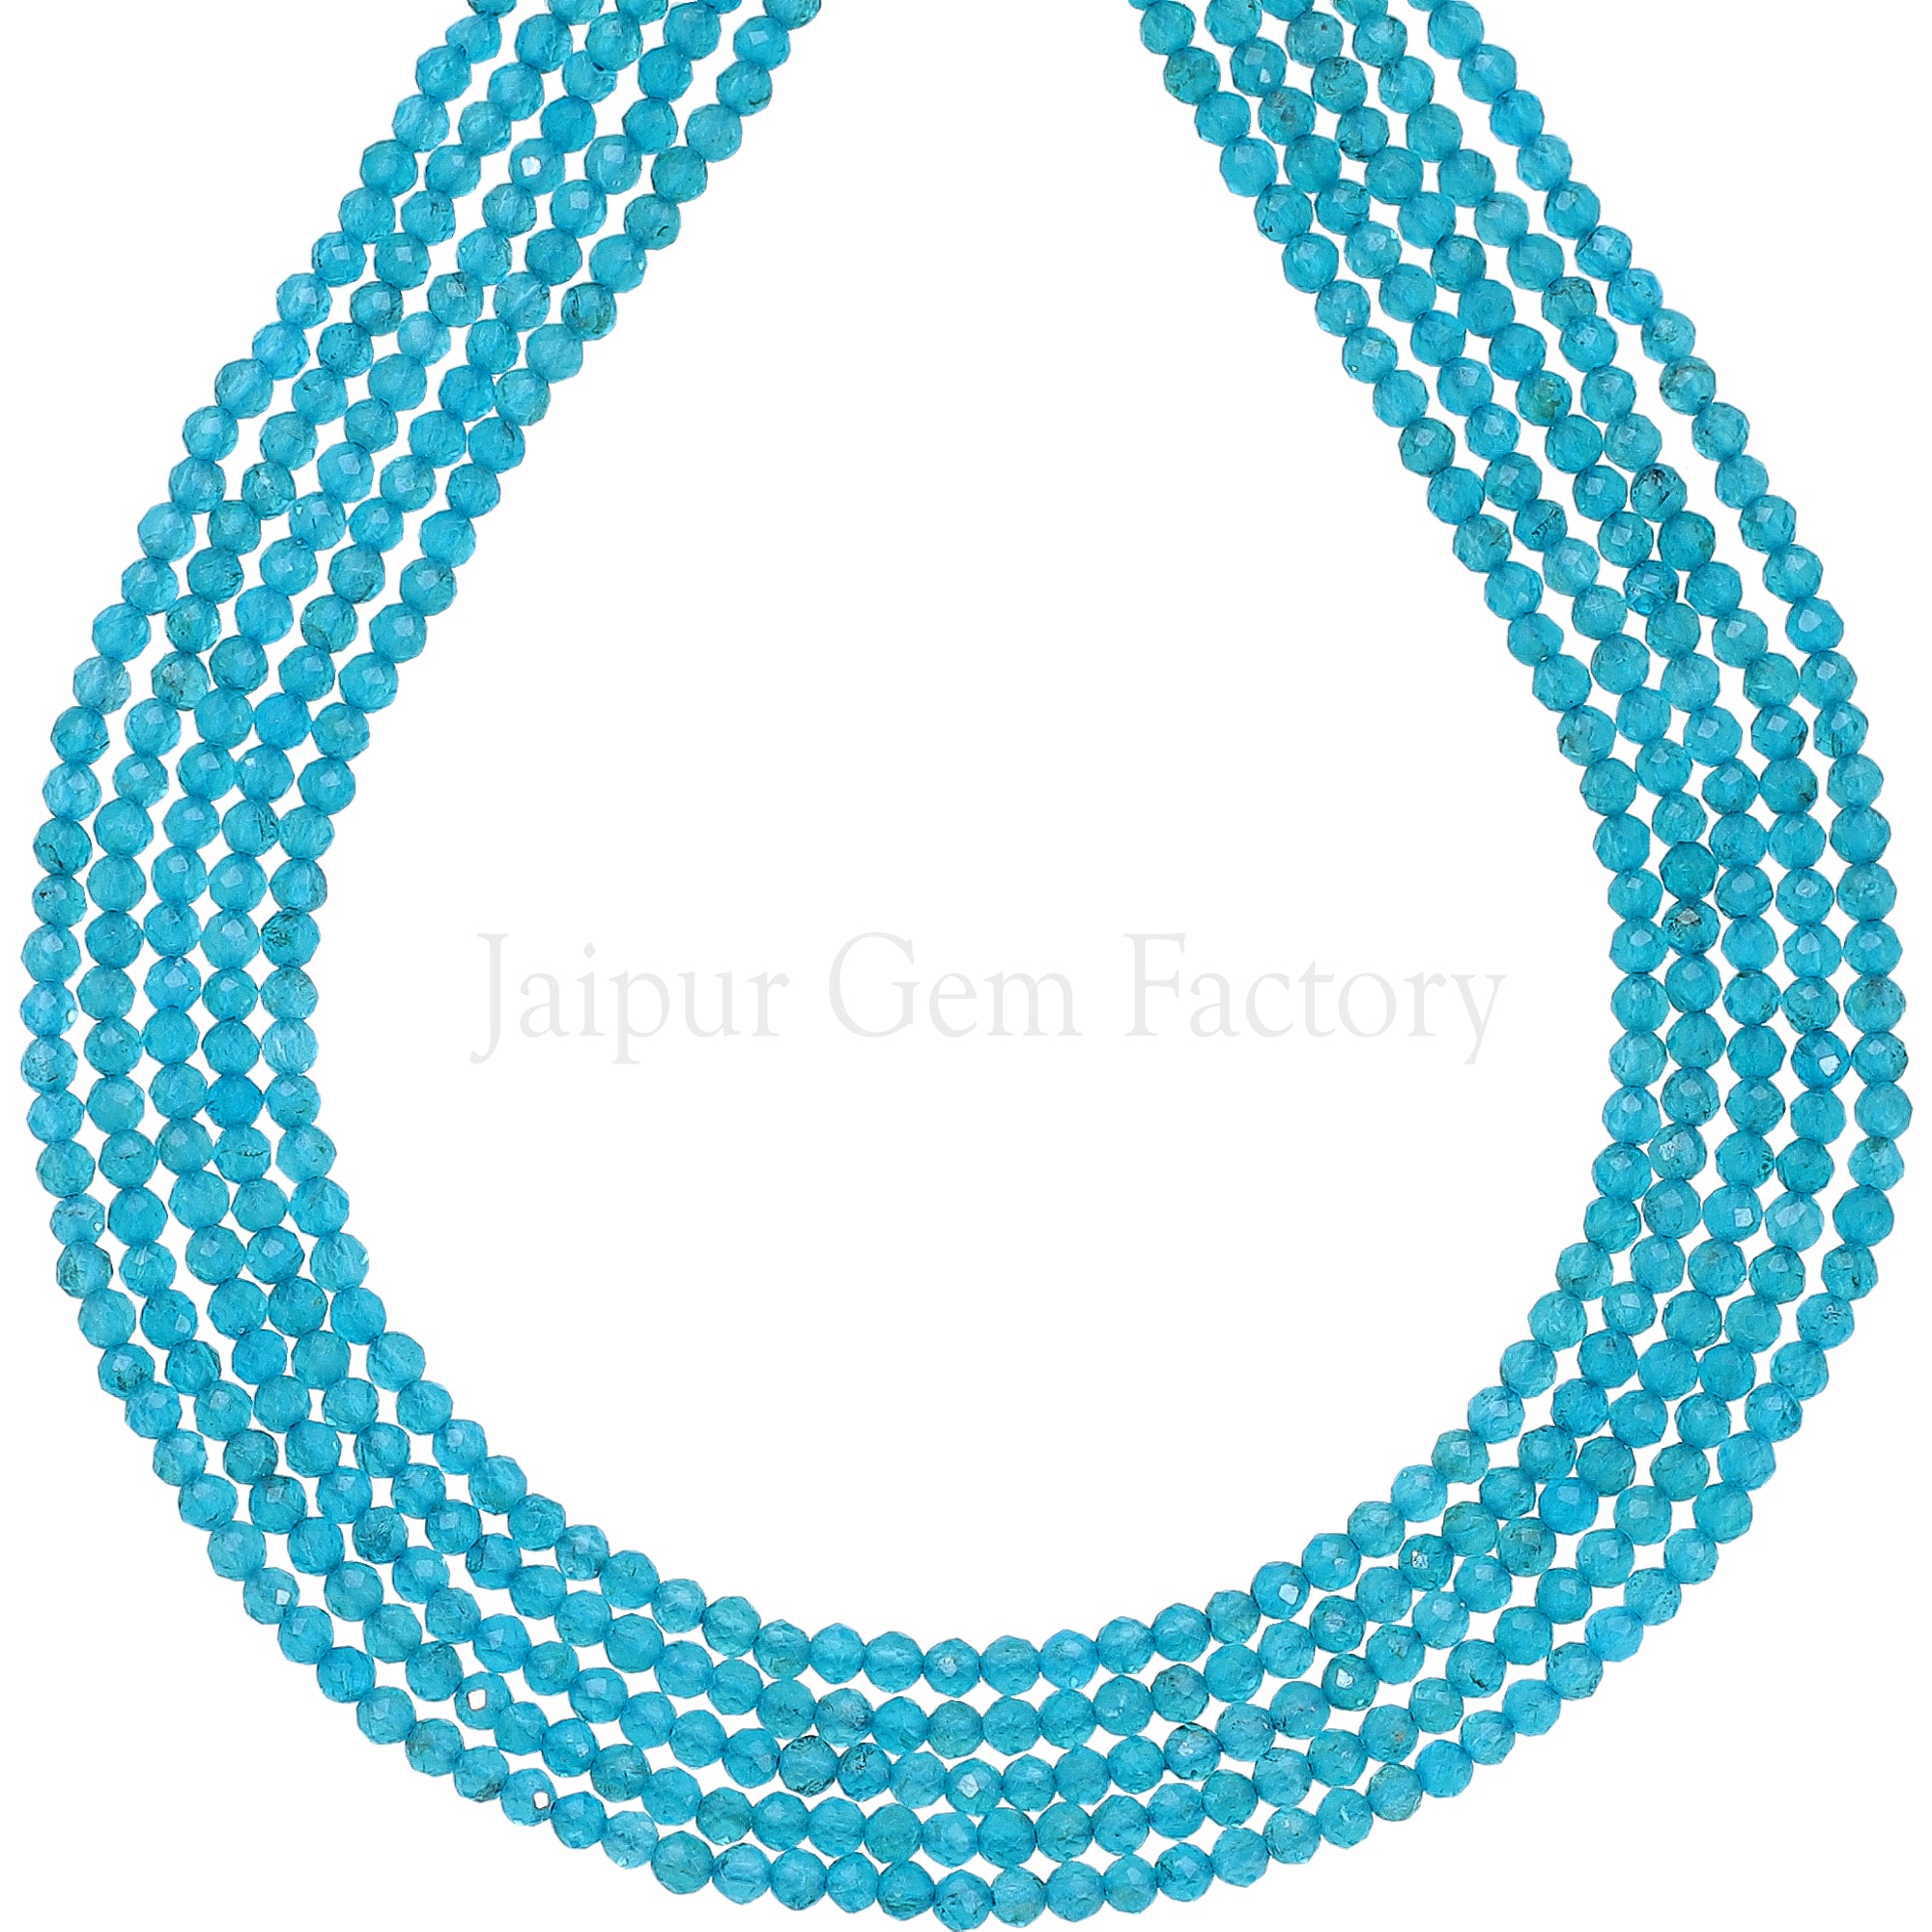 2-2.5 MM Apatite Faceted Round Beads